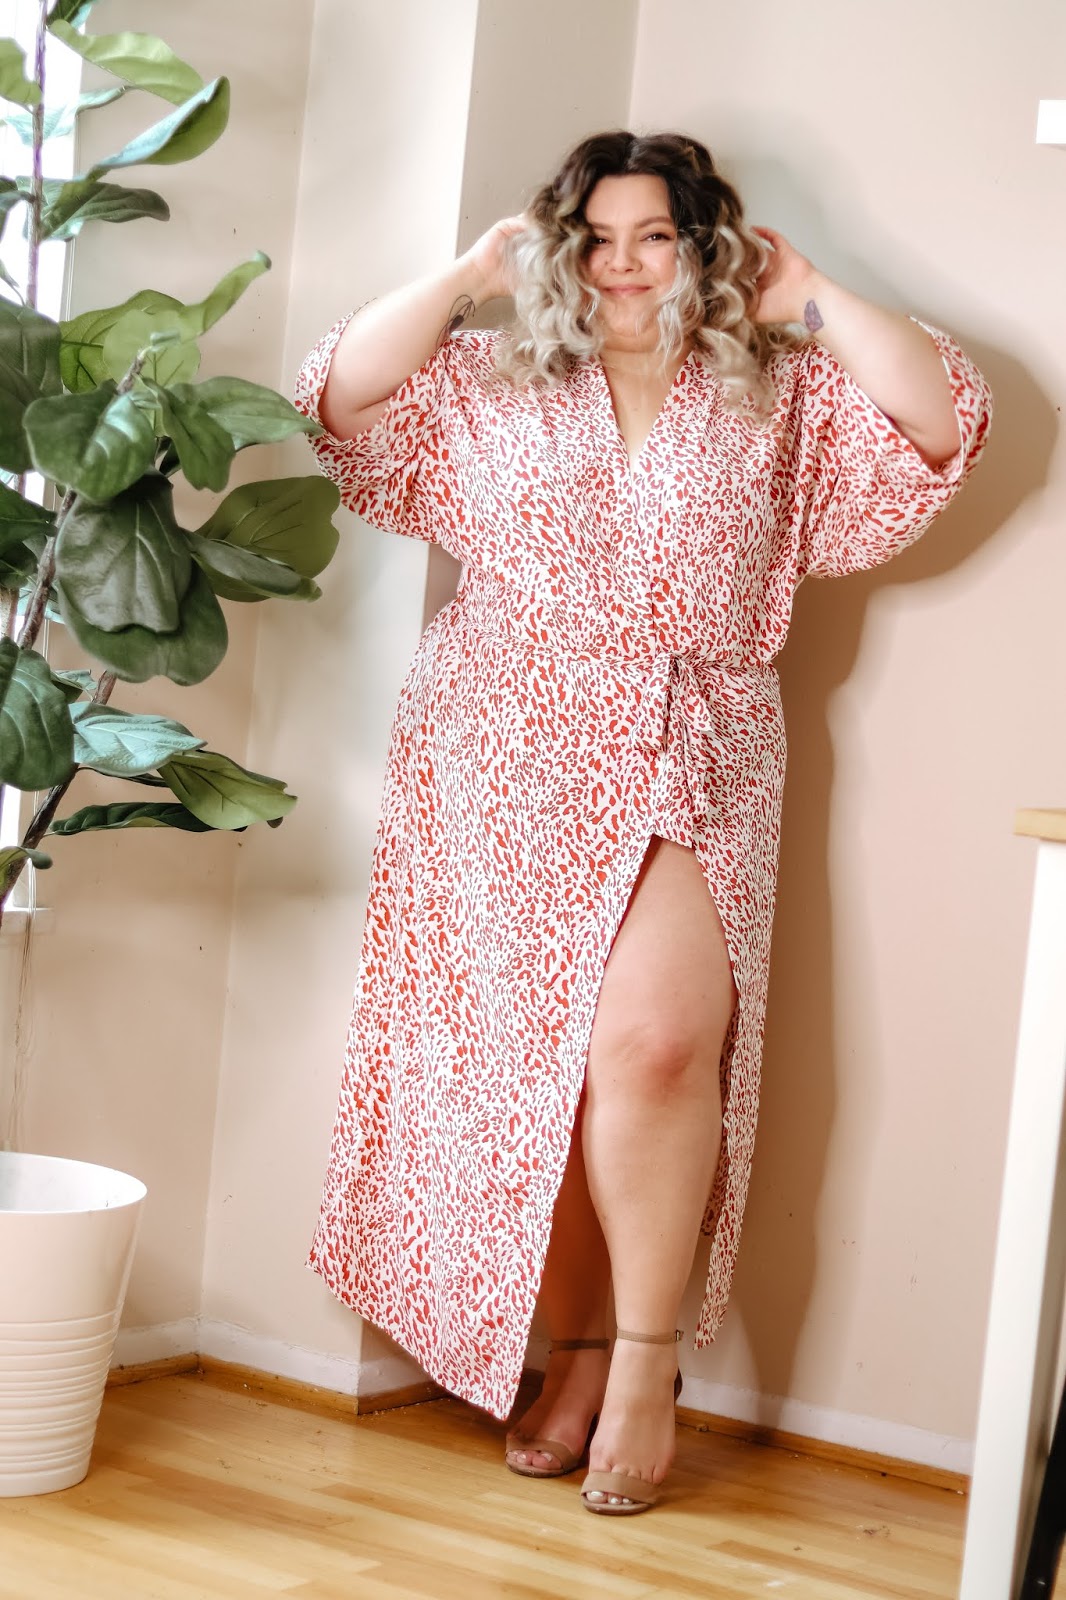 Chicago Plus Size Petite Fashion Blogger Natalie in the City reviews Forever 21's kimonos and talks about how to boost confidence.